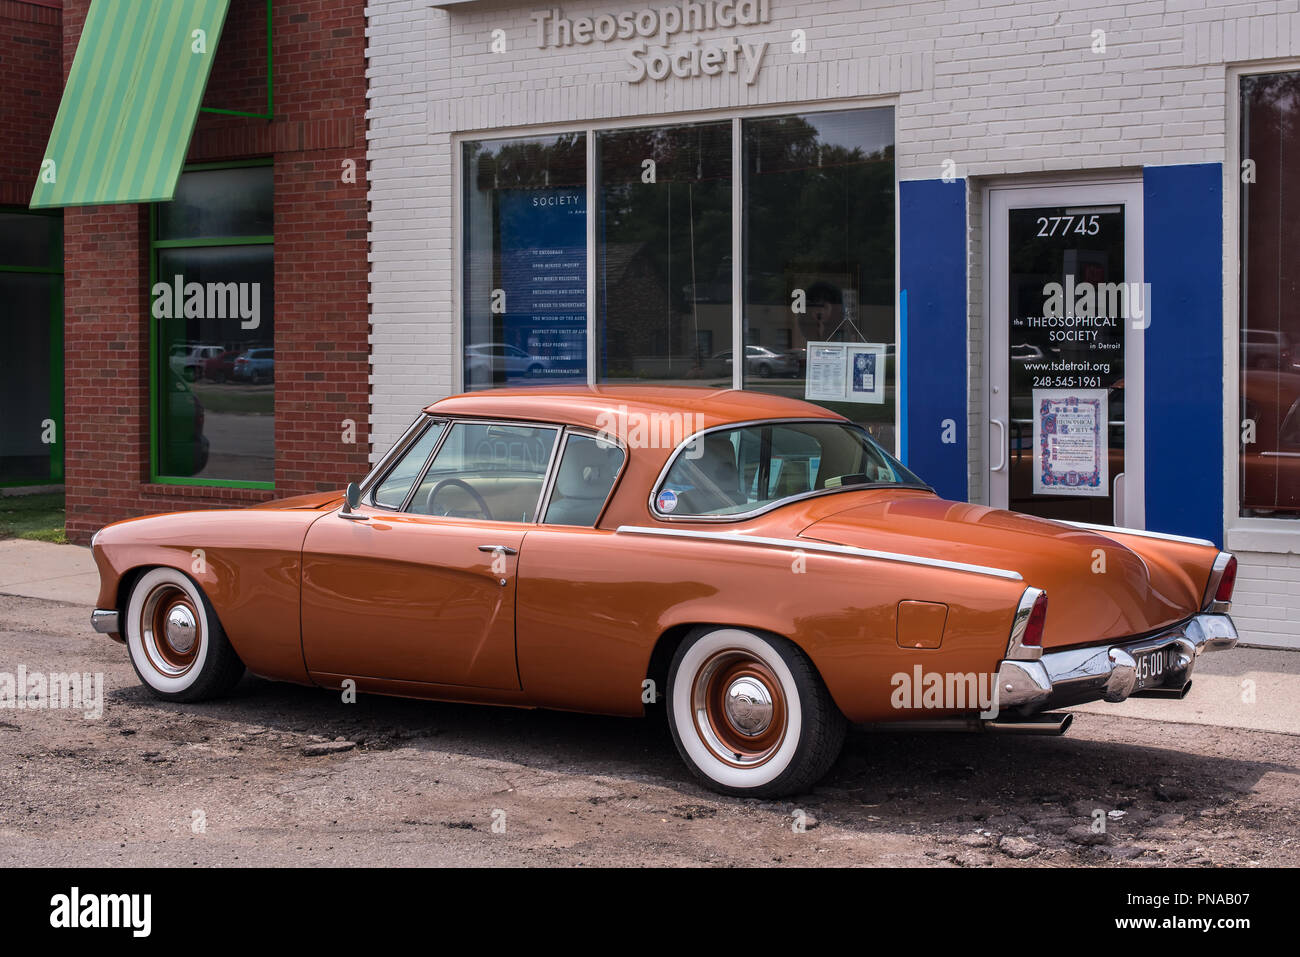 BERKLEY, MI/USA - AUGUST 16, 2018: A 1953 Studebaker Commander in front of the Theosophical Society, at the Woodward Dream Cruise. Stock Photo